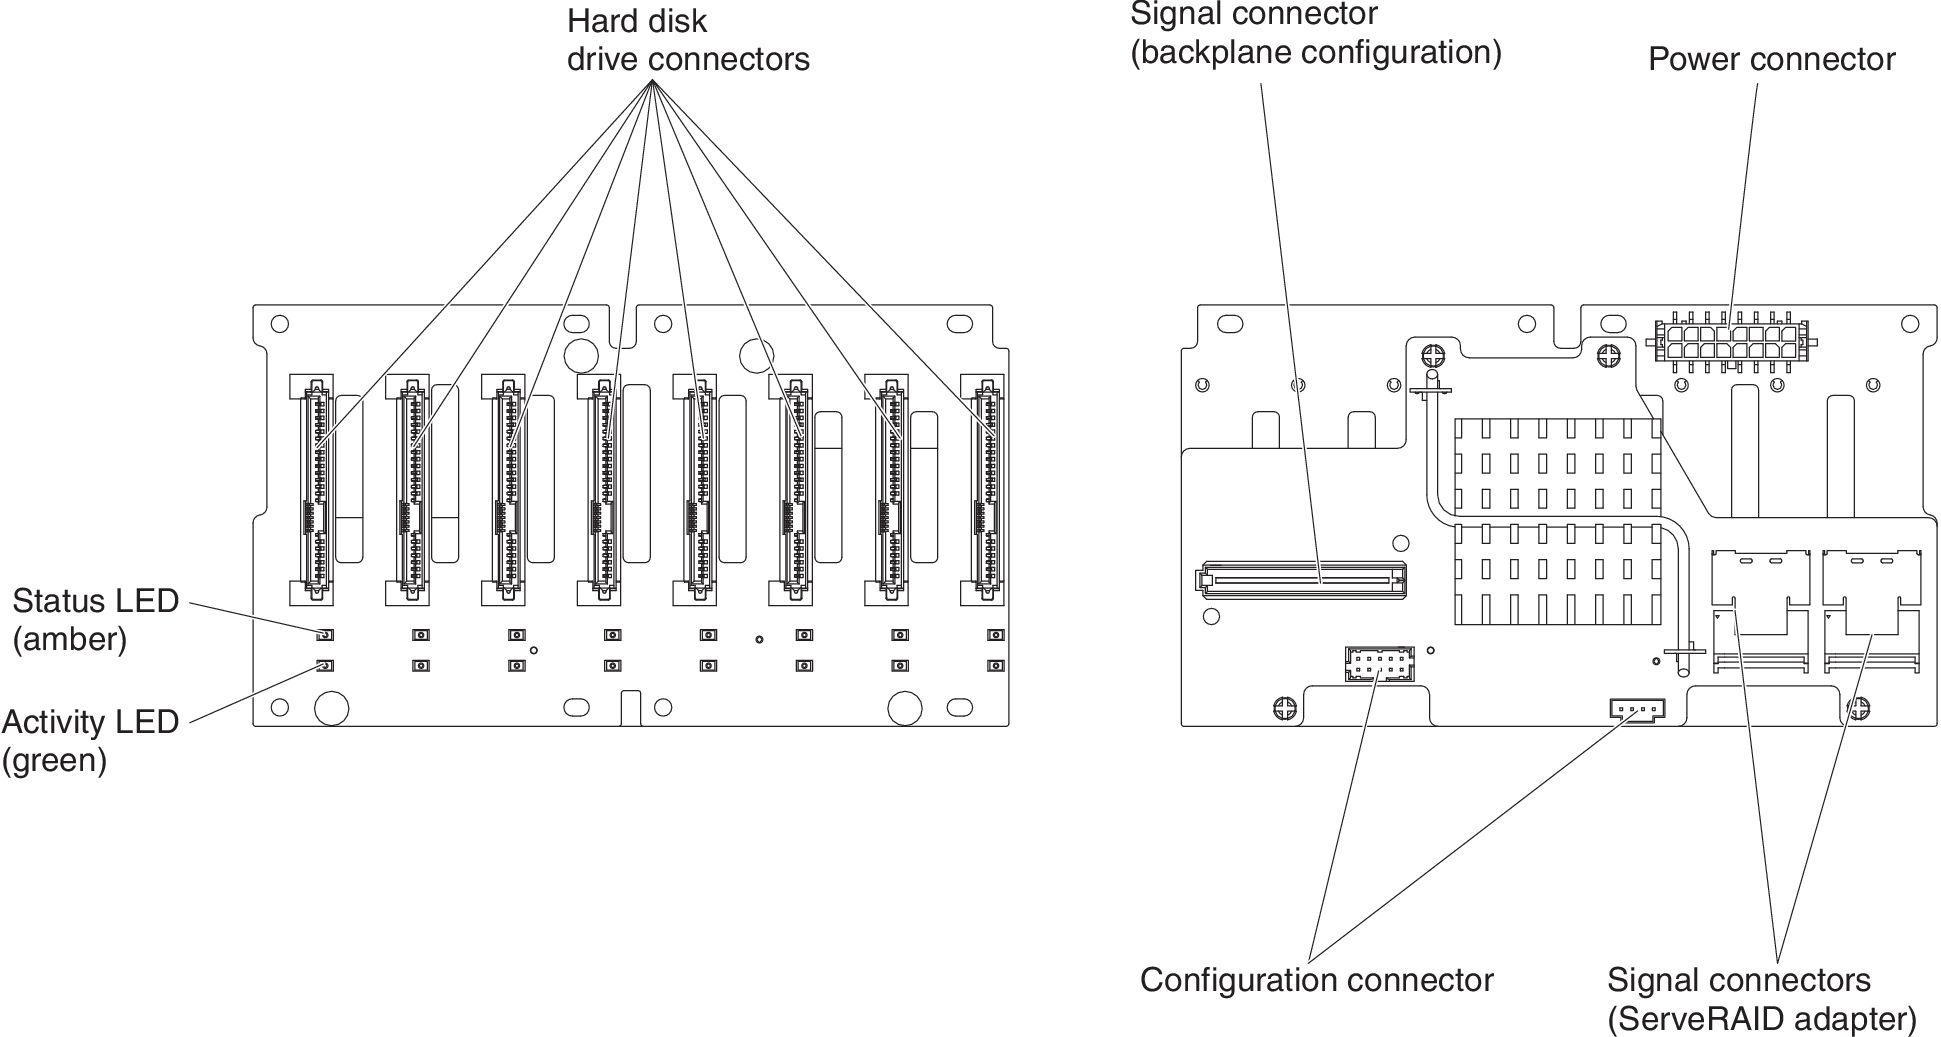 Connectors on the 2.5-inch hard disk drive backplane